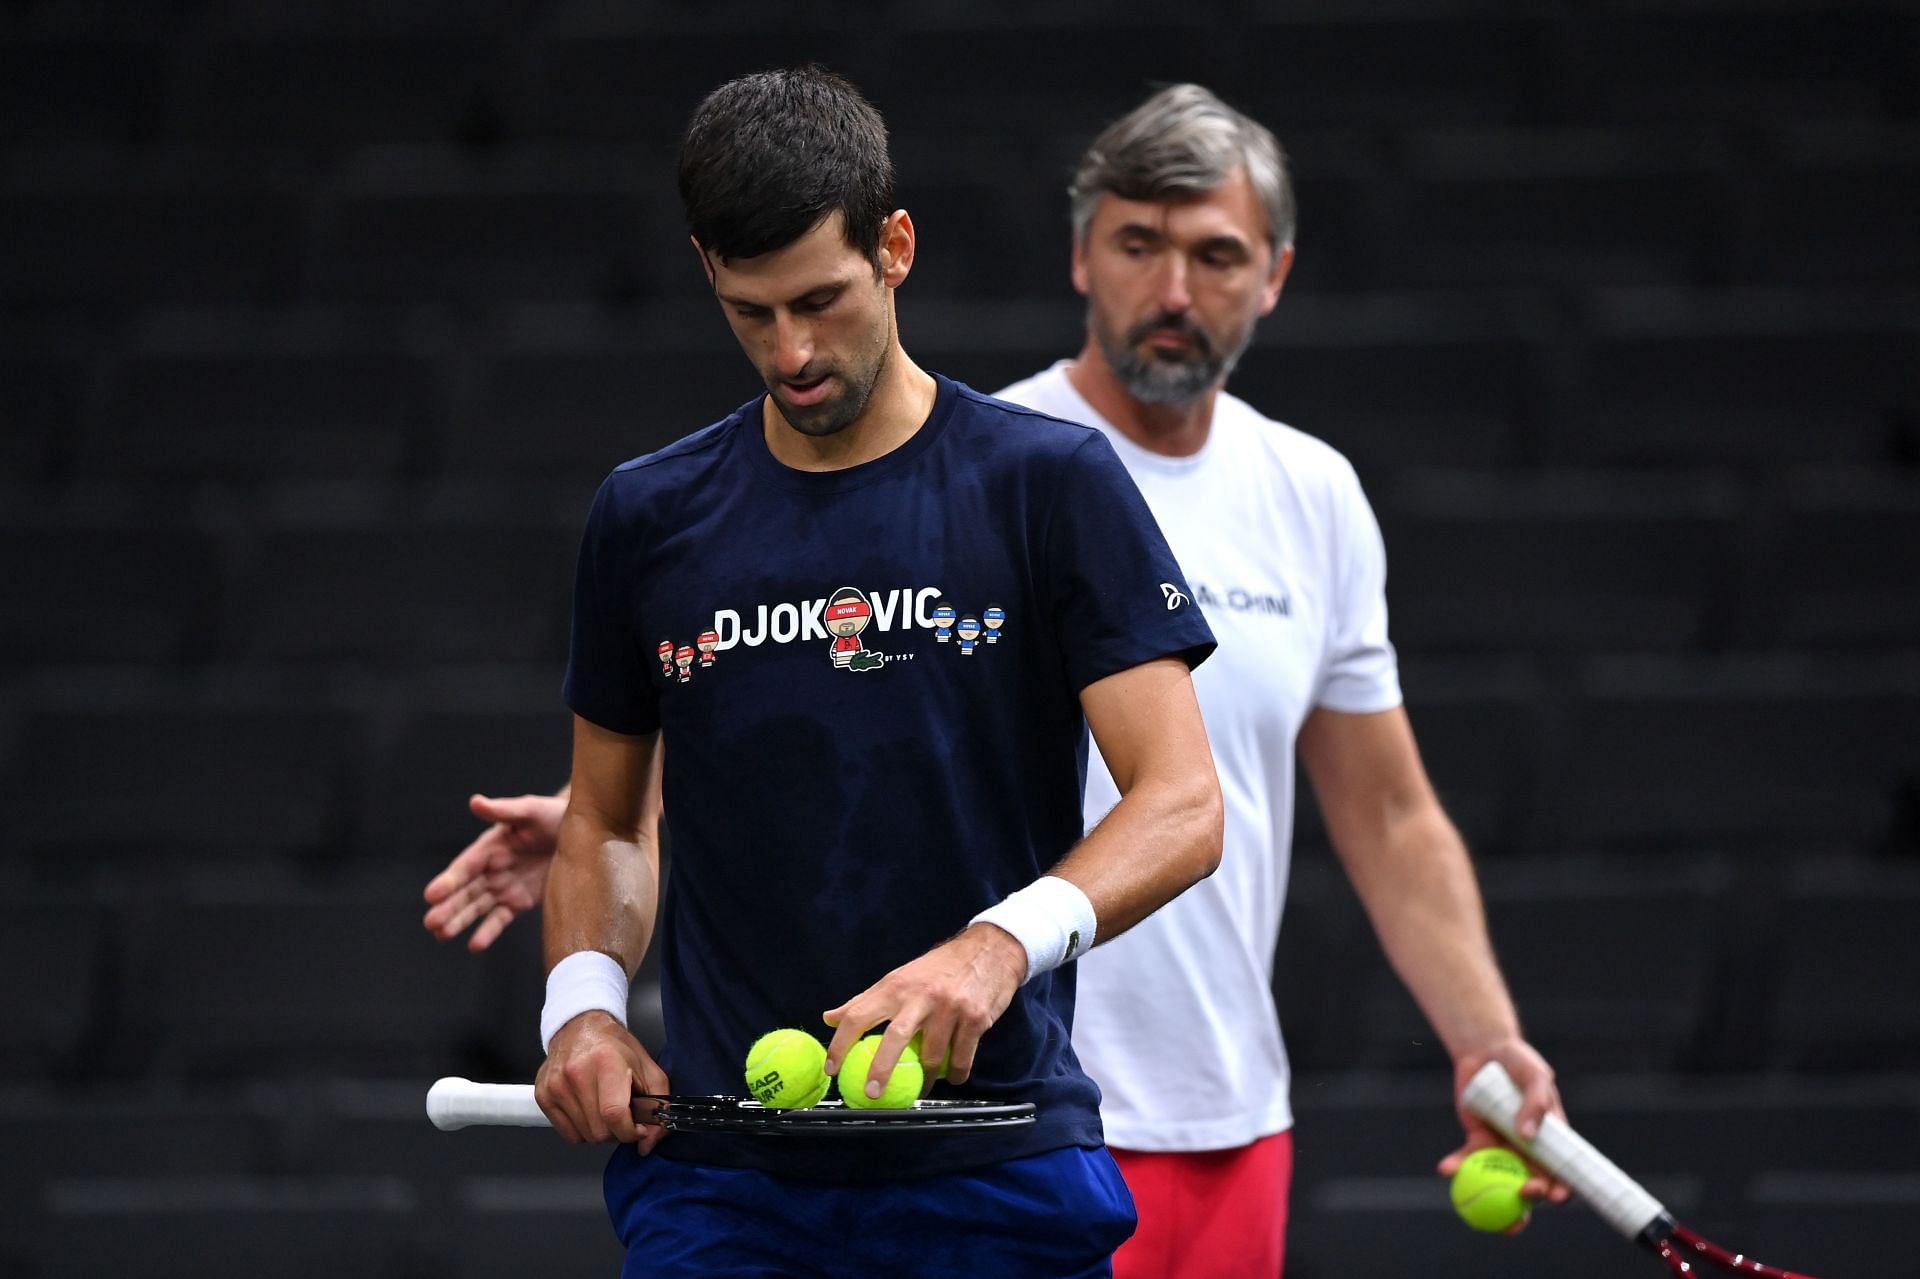 Off-court coaching will be allowed by the ATP for the second half of the 2022 season.